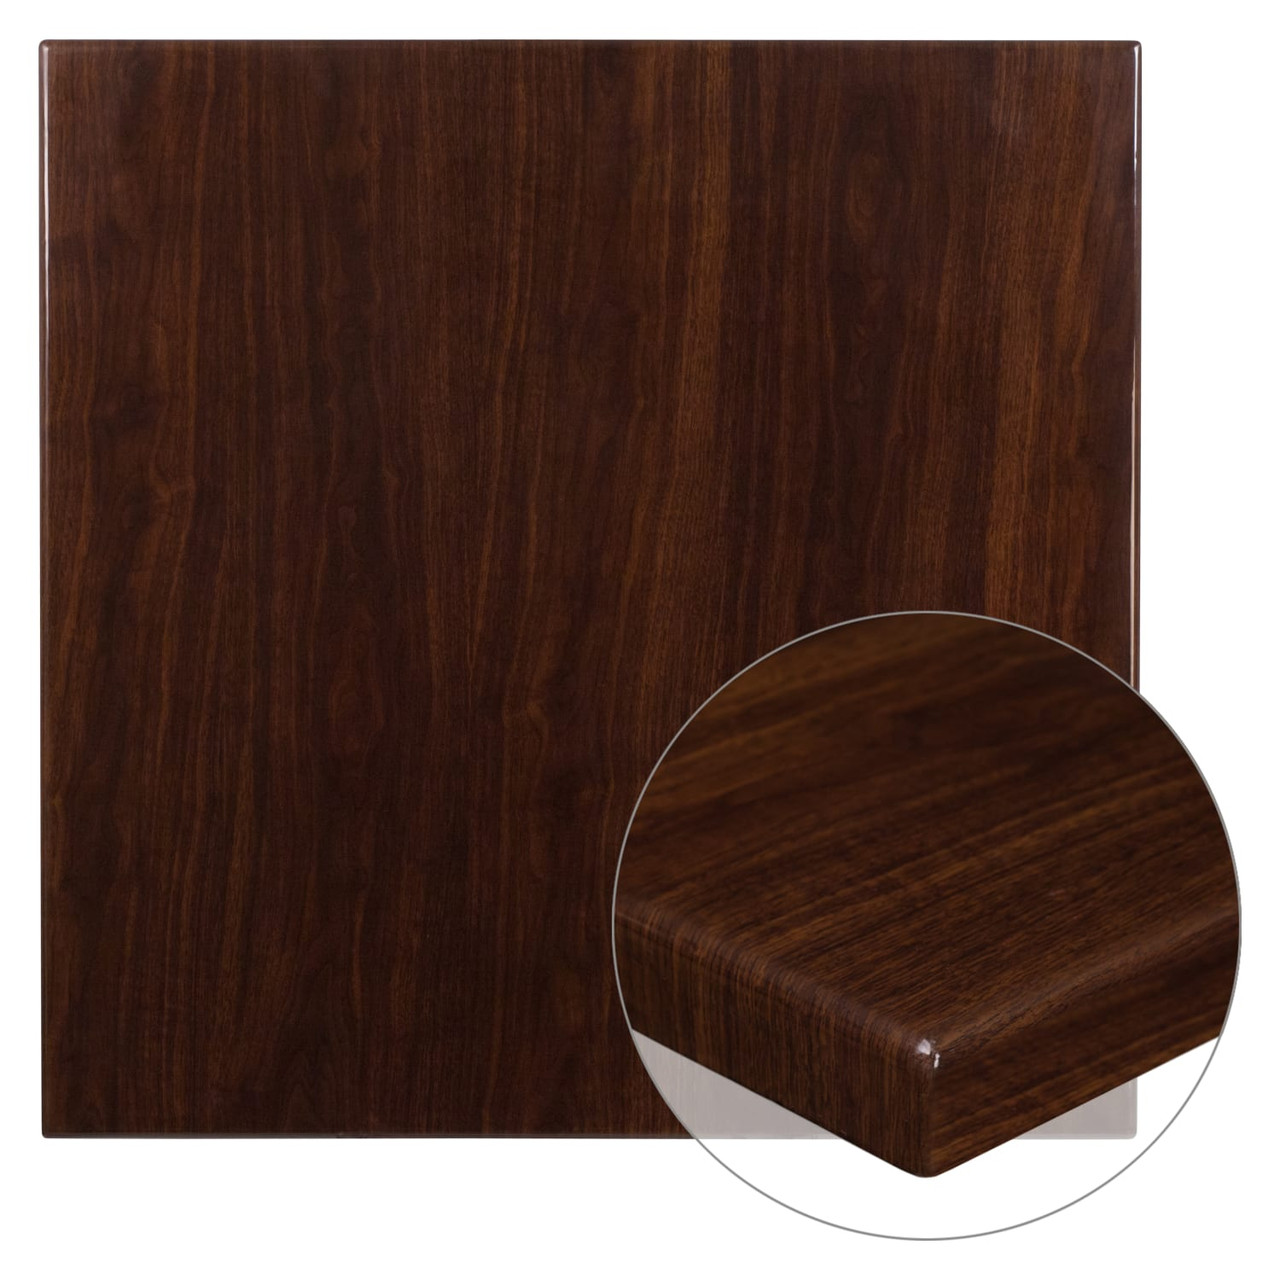 36” Square High-Gloss Walnut Resin Table Top with 2” Thick Drop-Lip